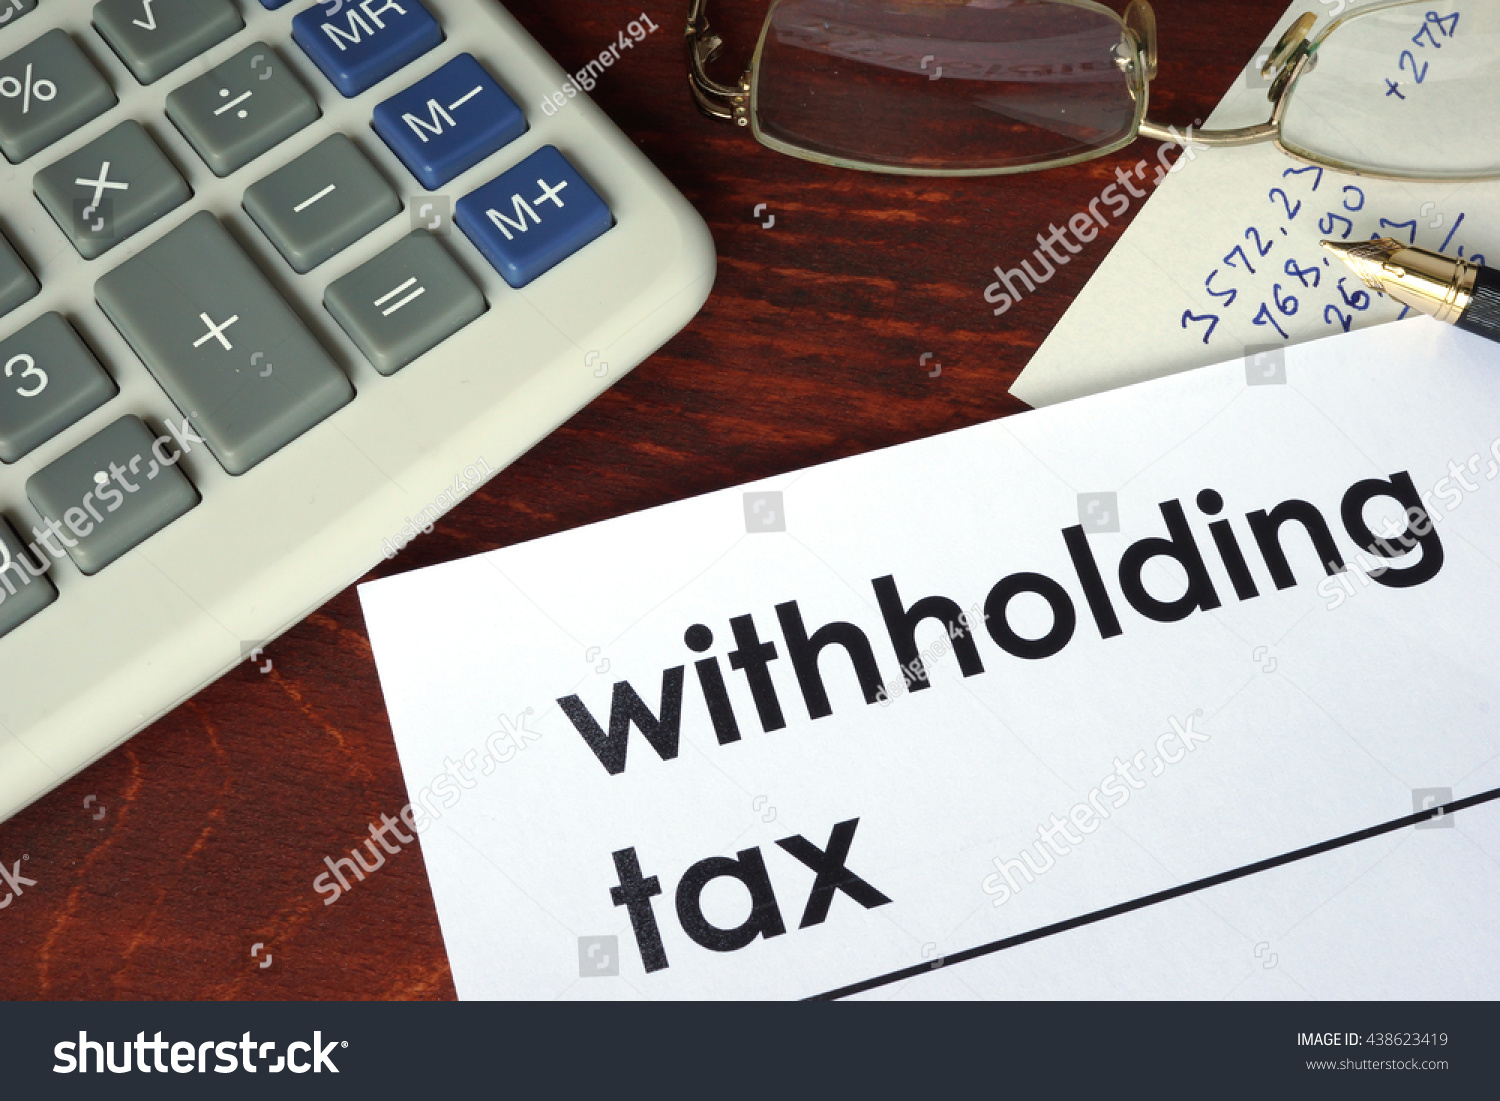 Withholding tax written on a paper.  #438623419